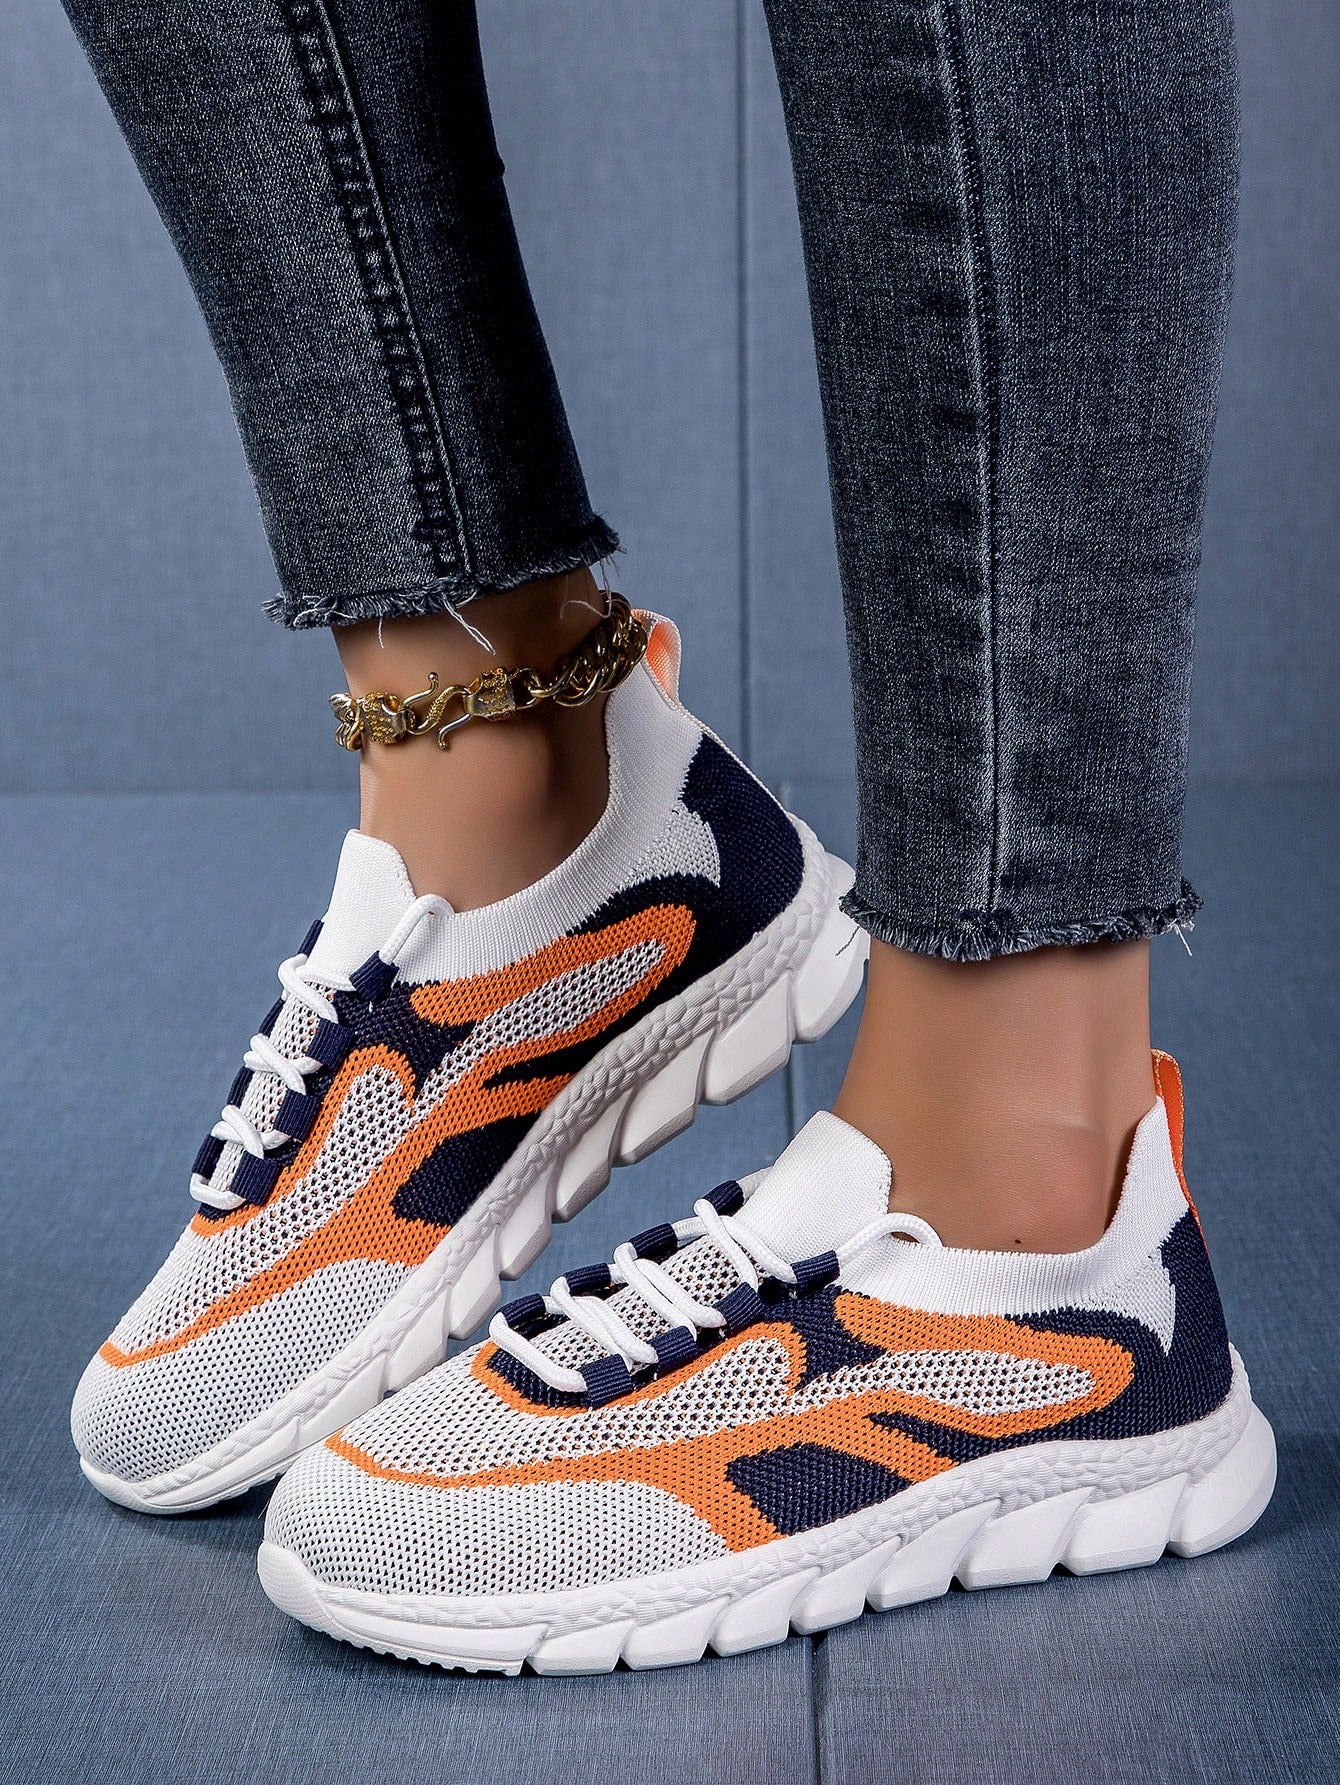 Women's Casual Running Shoes, New Spring And Autumn Soft Sole Color Block Breathable Casual Shoes, All-Match Sports Shoes, Personality Trendy Fashion, Slip-Resistant, Odor-Resistant, Wear-Resistant, Lightweight, Outdoor Driving And Work Shoes,-Orange-1